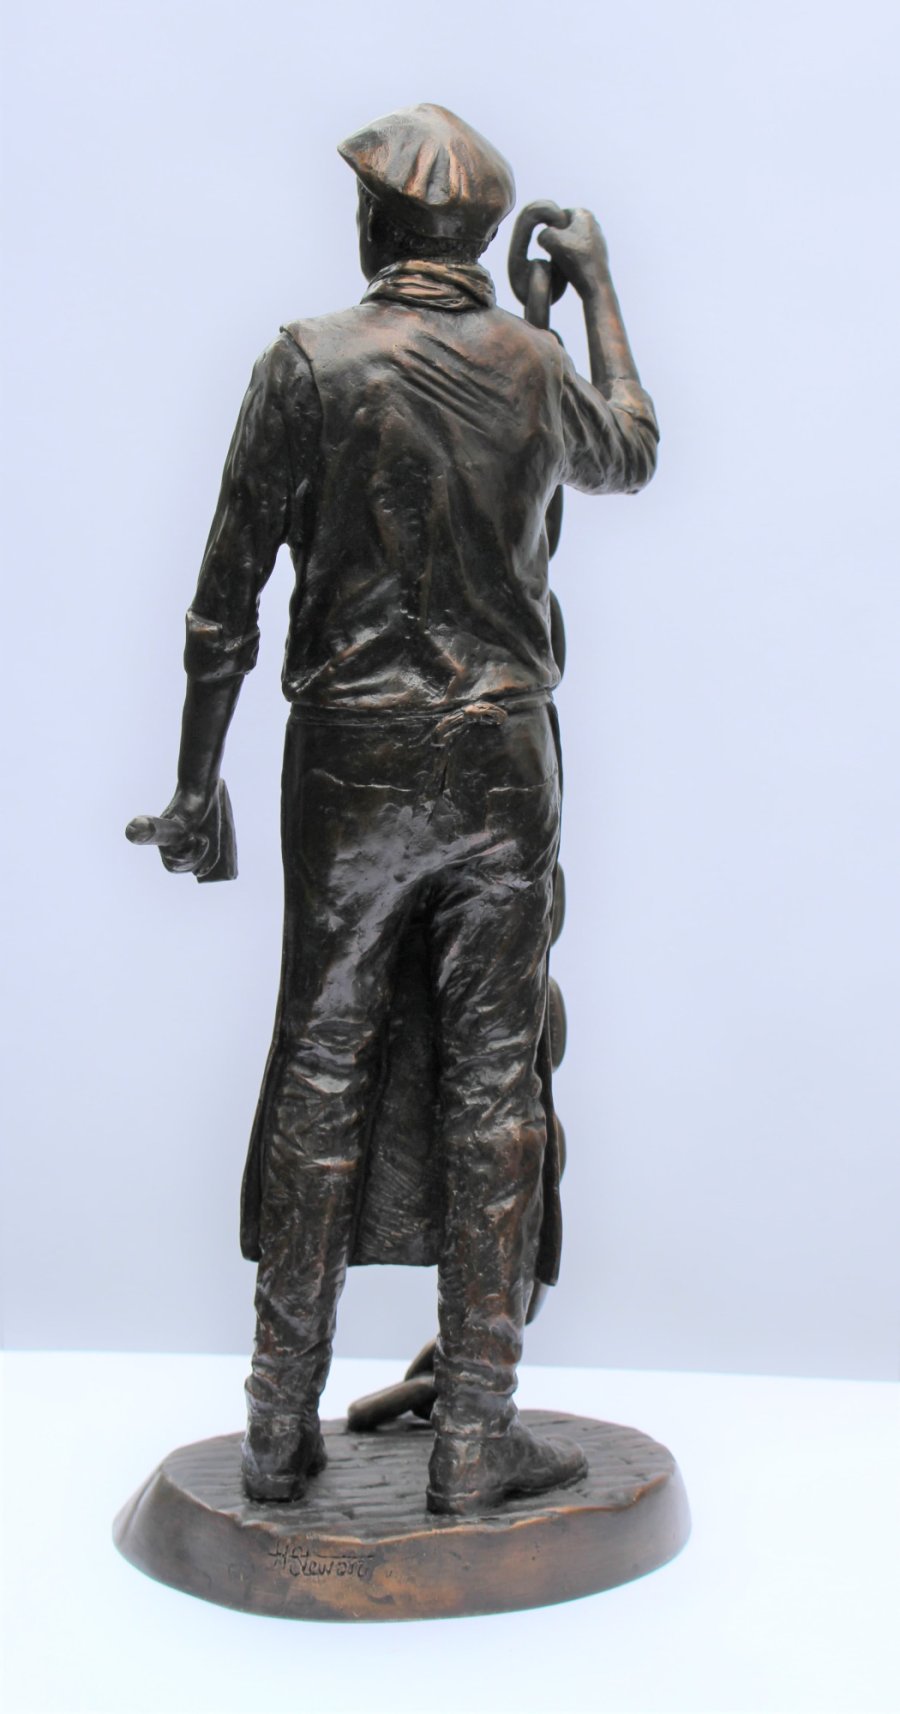 Chain Maker bronze sculpture from the back